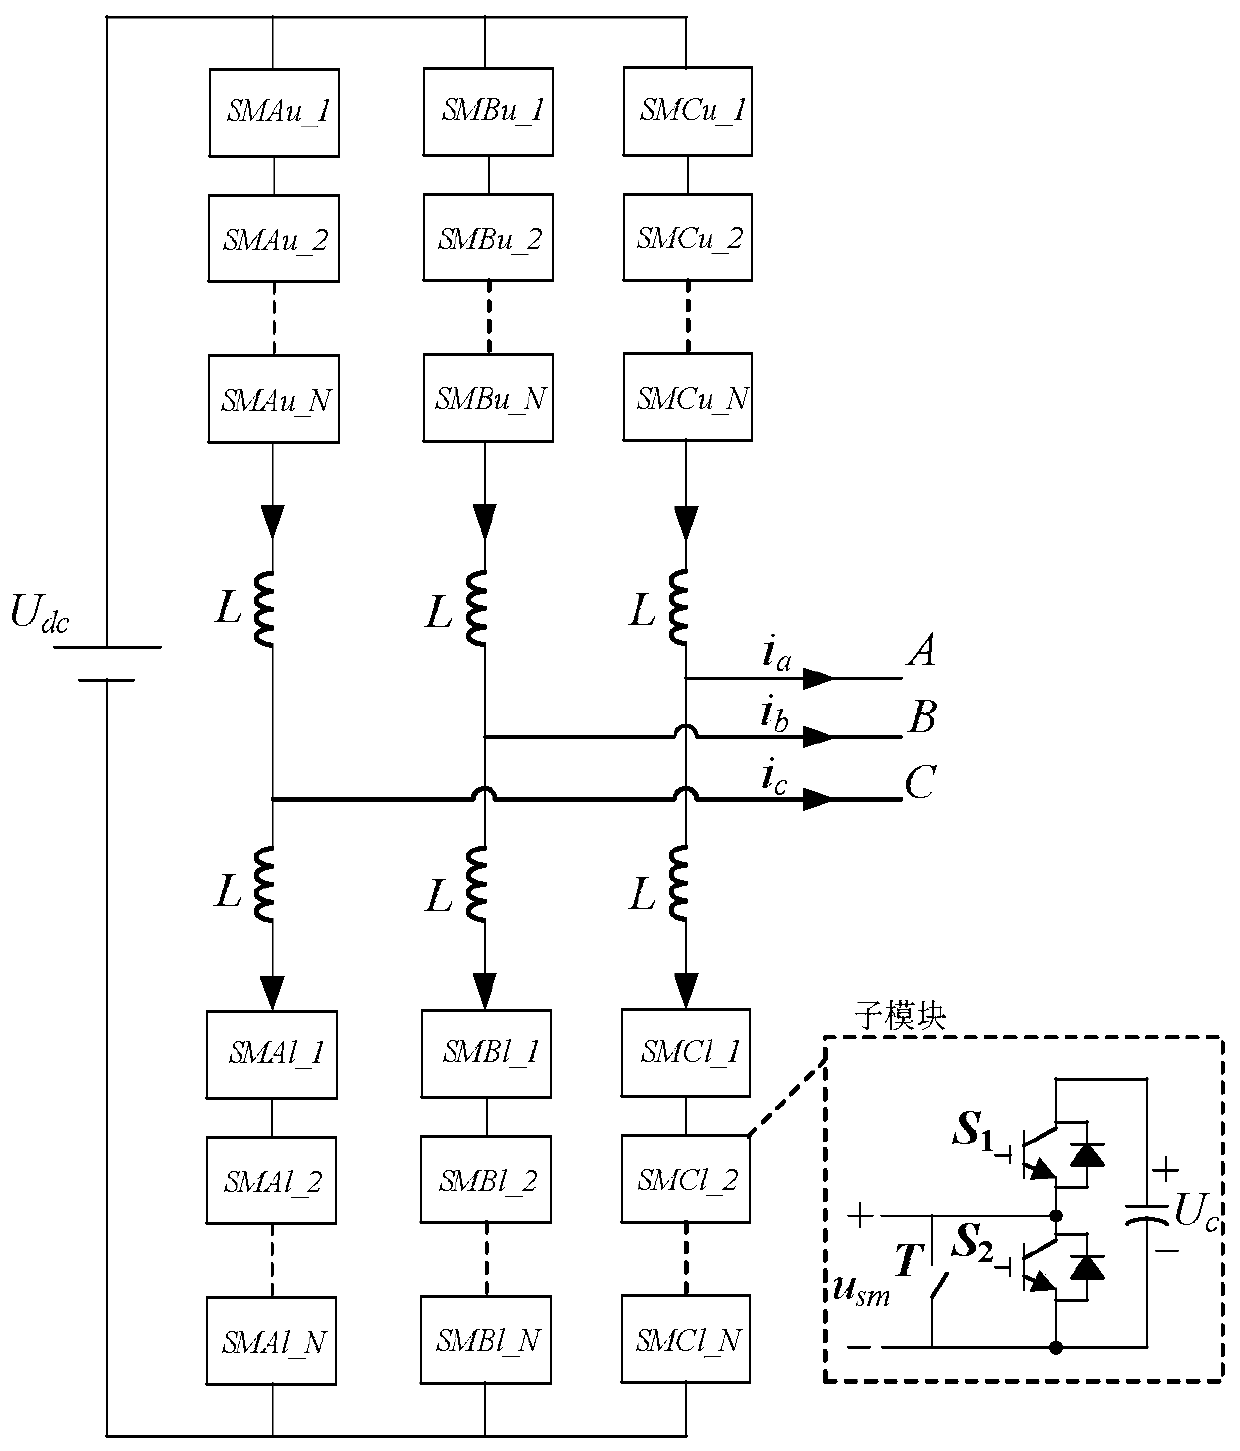 A method for diagnosing open-circuit faults of mmc power devices